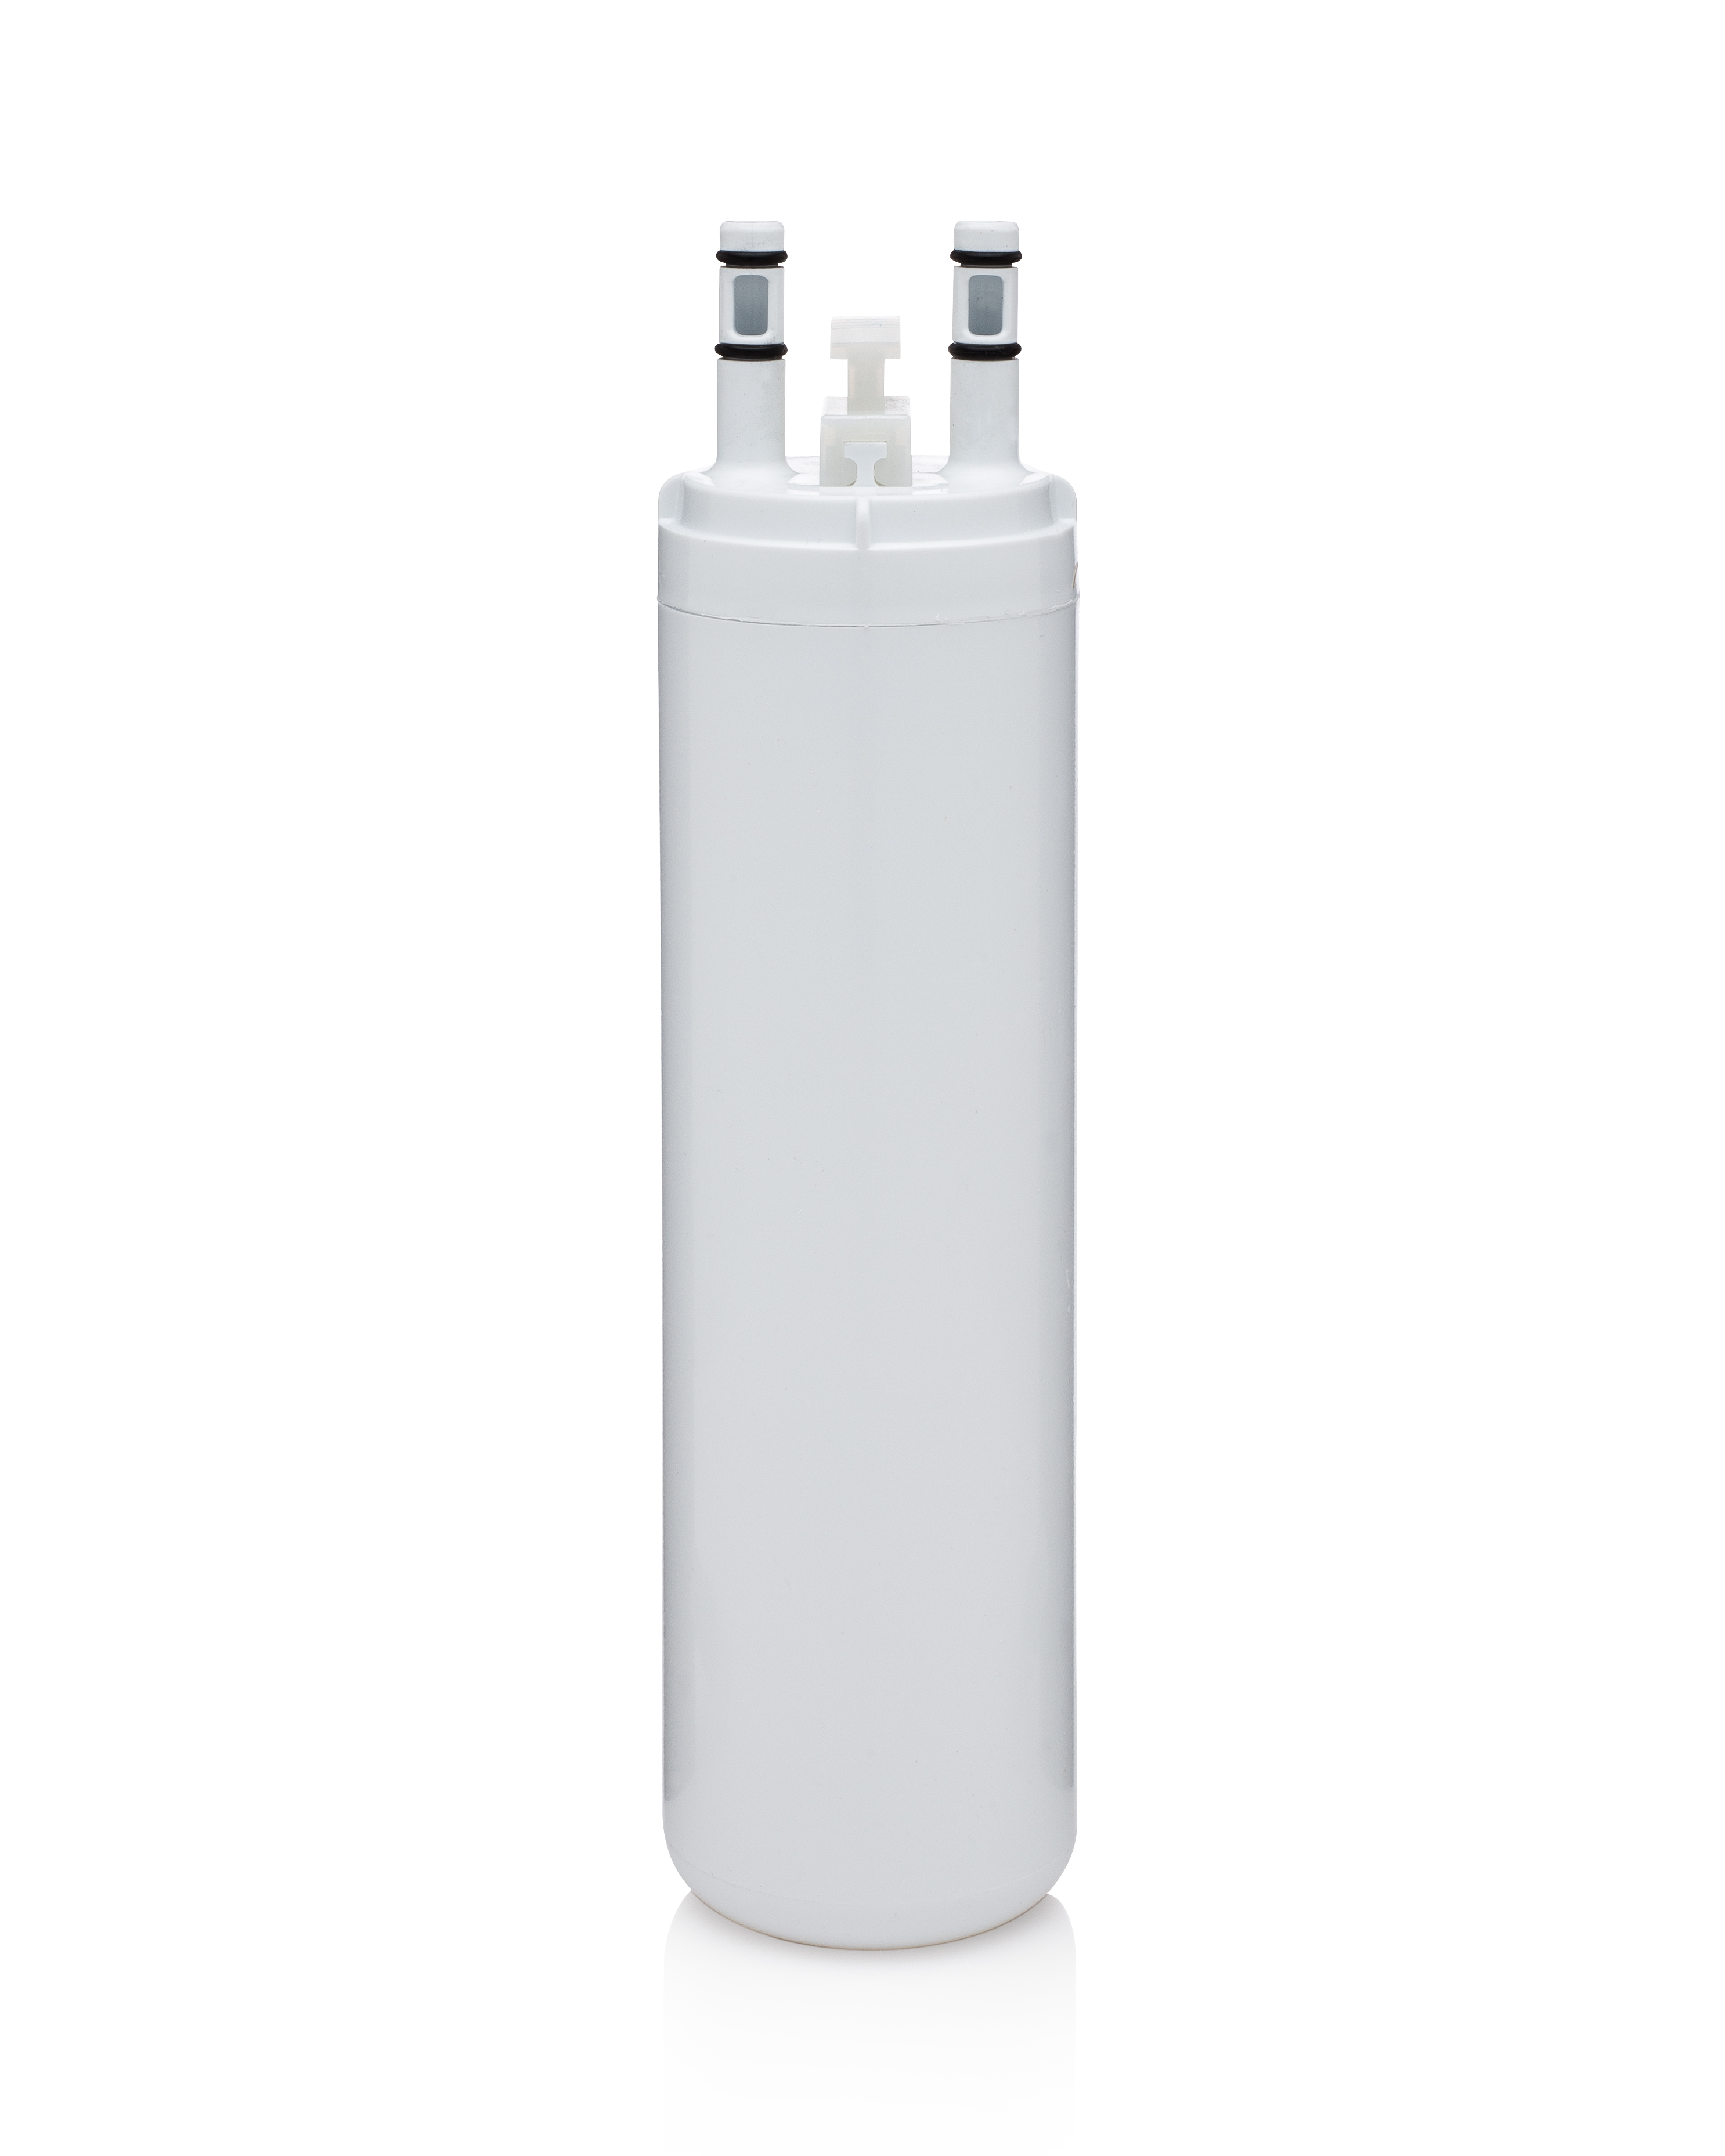 WF3CB Frigidaire Refrigerator Water Filter for Water and Ice, 200 Gallons - image 2 of 4